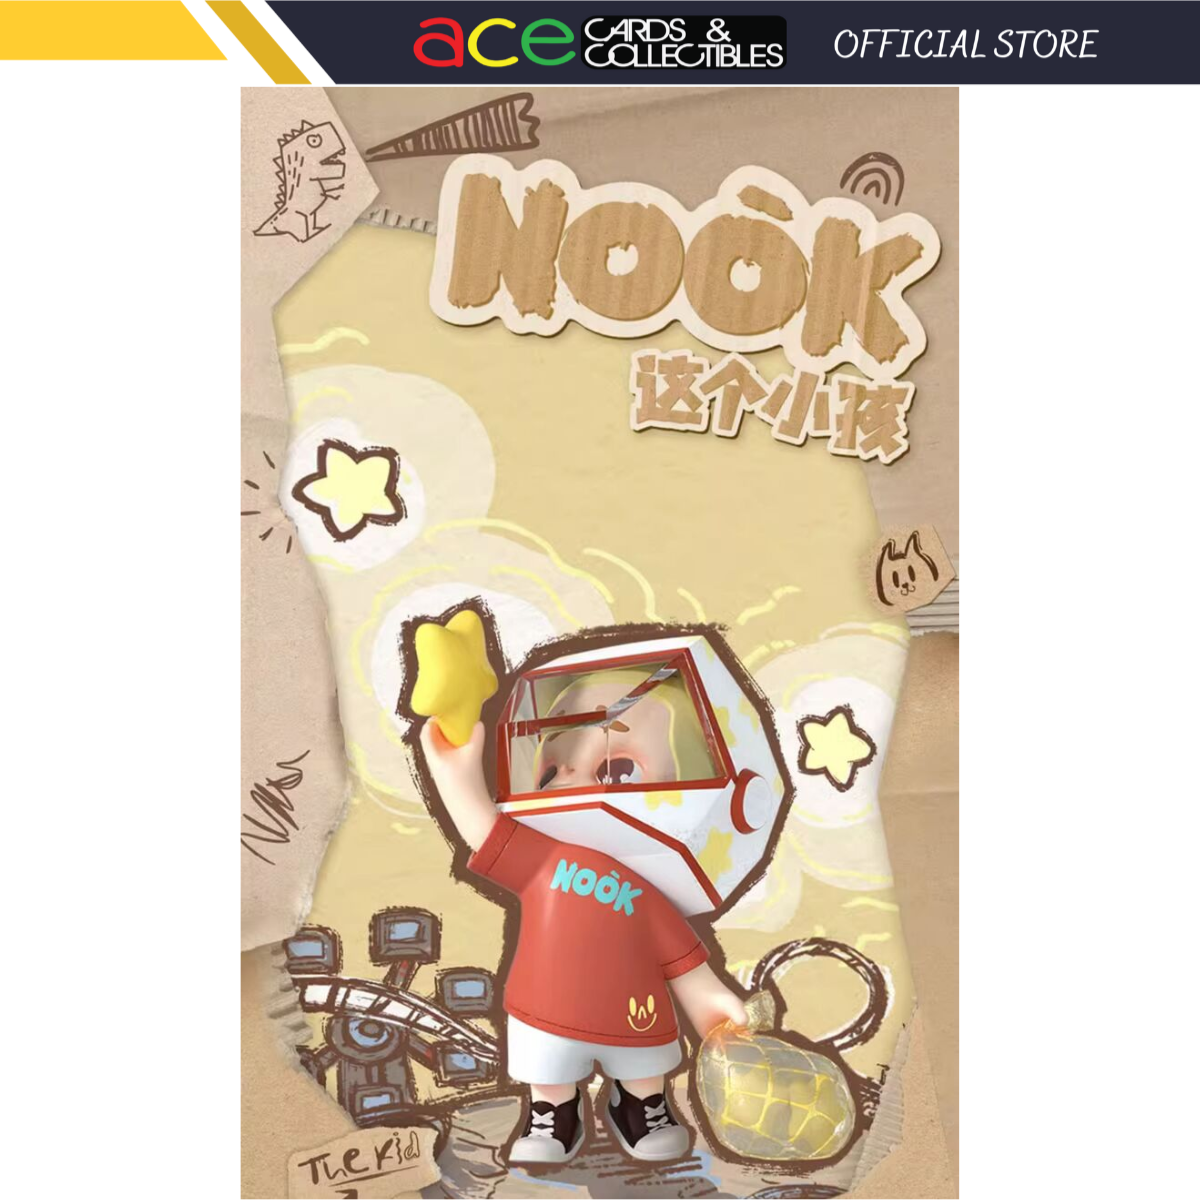 52Toys x NOOK This Kid Series-Single Box (Random)-52Toys-Ace Cards & Collectibles